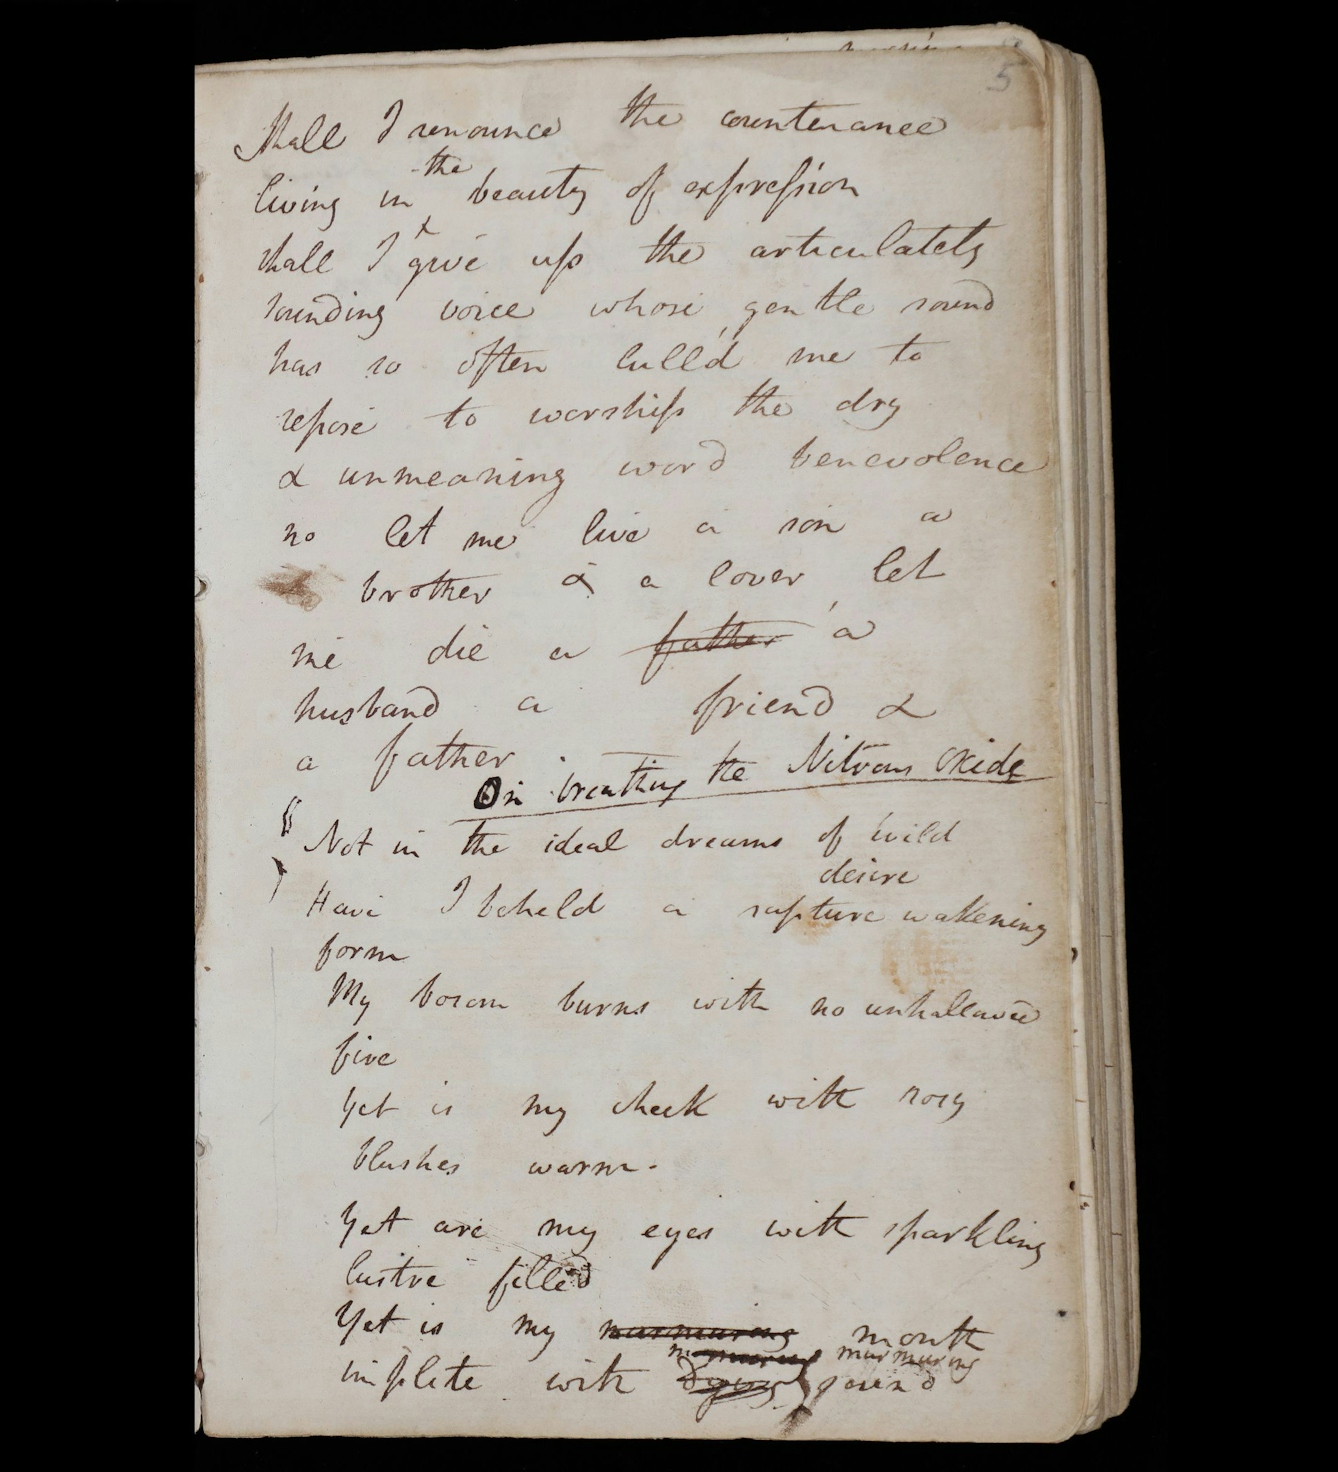 A hand written page from one of Humphry Davy's scientific notebooks about his research on nitrous oxide. Half way down is a poem entitled 'On Breathing the Nitrous Oxide' that may or may not have been written while he was intoxicated by the gas.